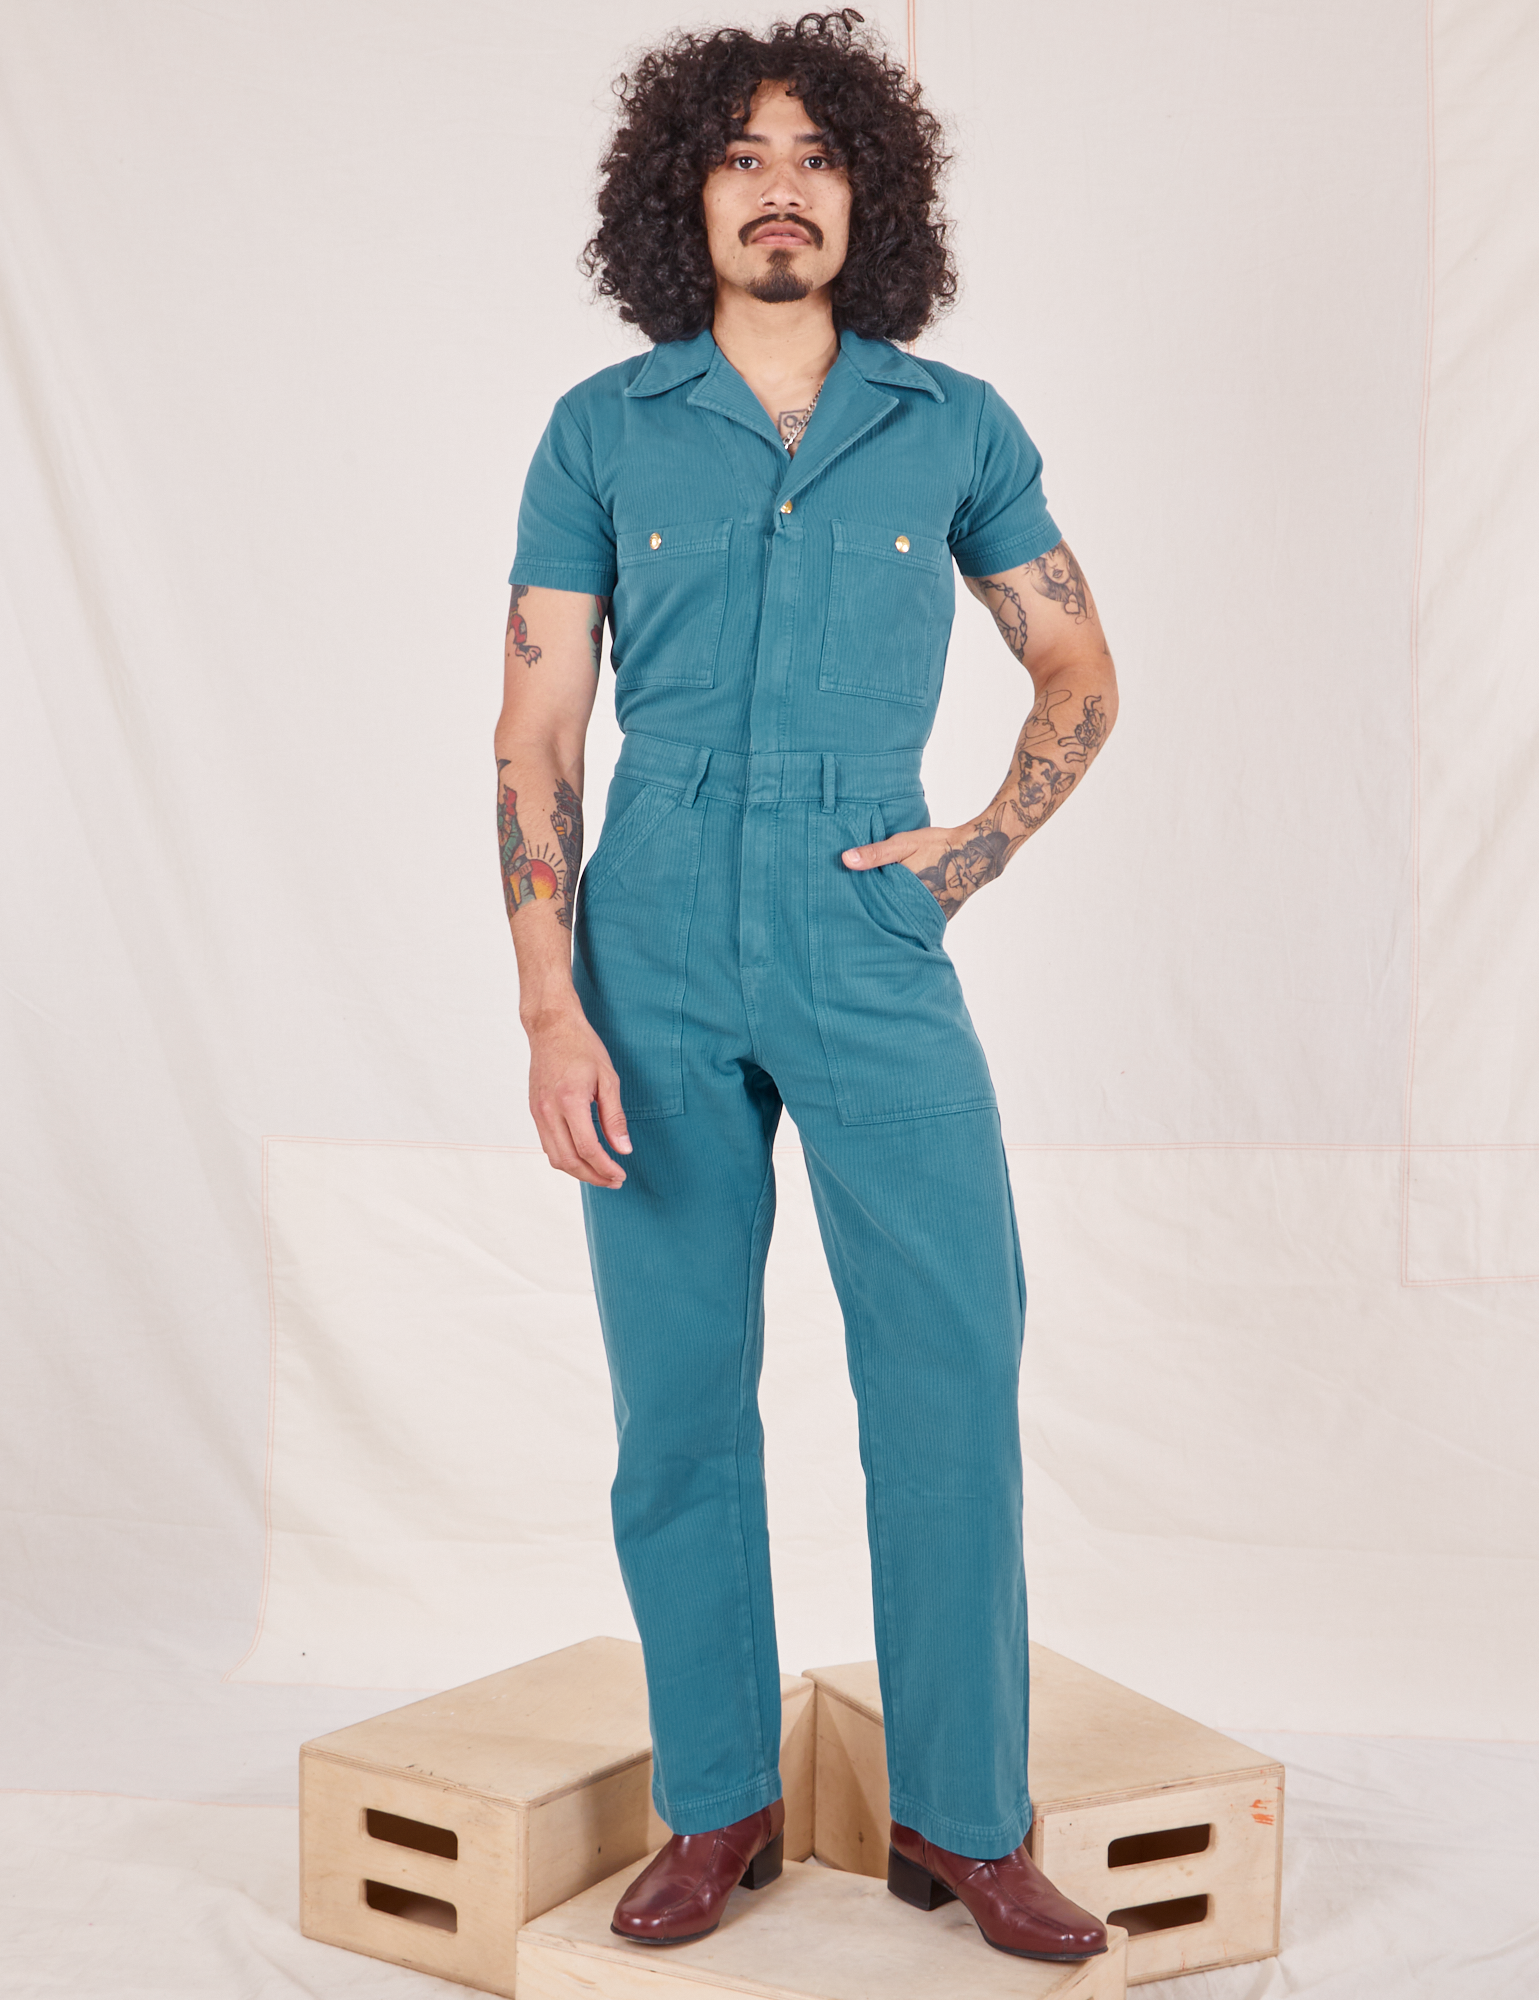 Heritage Short Sleeve Jumpsuit in Marine Blue worn by Jesse standing on wooden crate